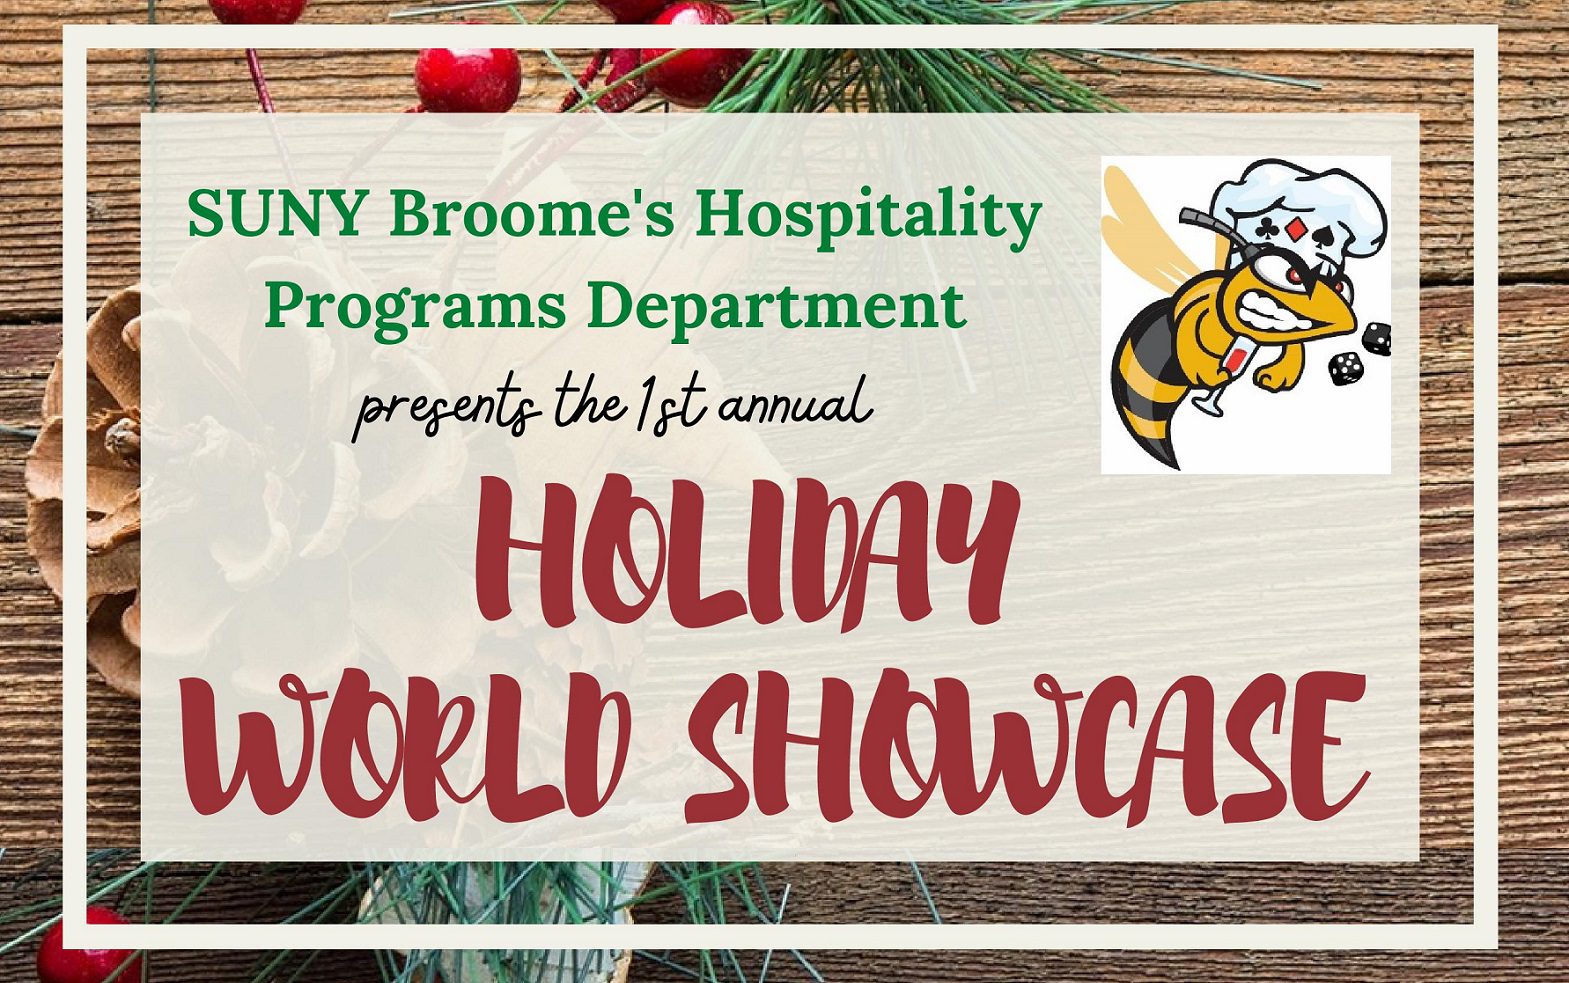 Hospitality Programs Department at their 1st annual Holiday World Showcase